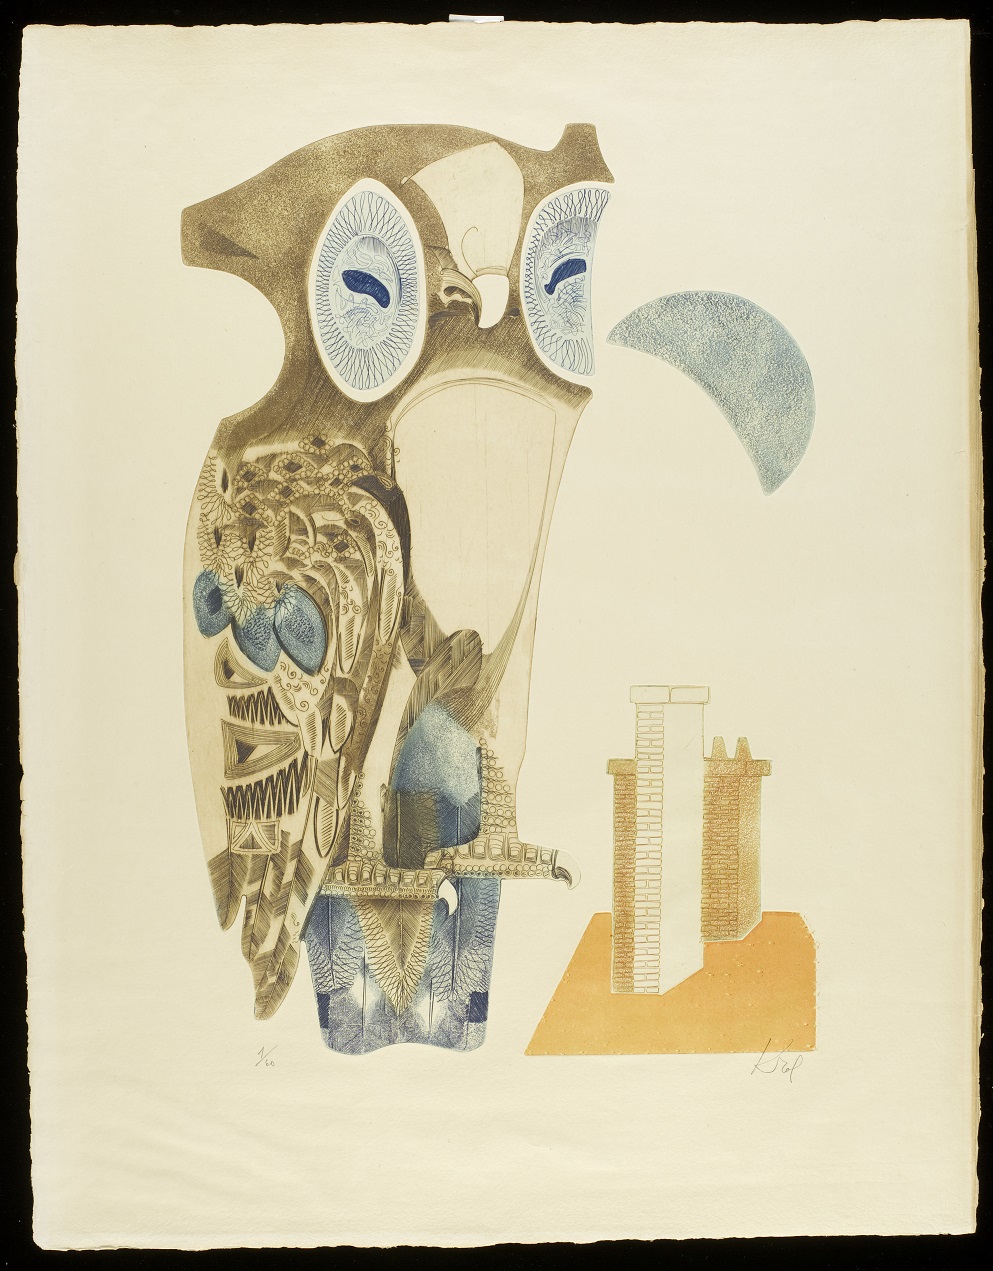 Colour etching and aquatint by Abram Krol, France, ca. 1958. Museum no. E.239-1994. ©Abram Krol/Victoria and Albert Museum.